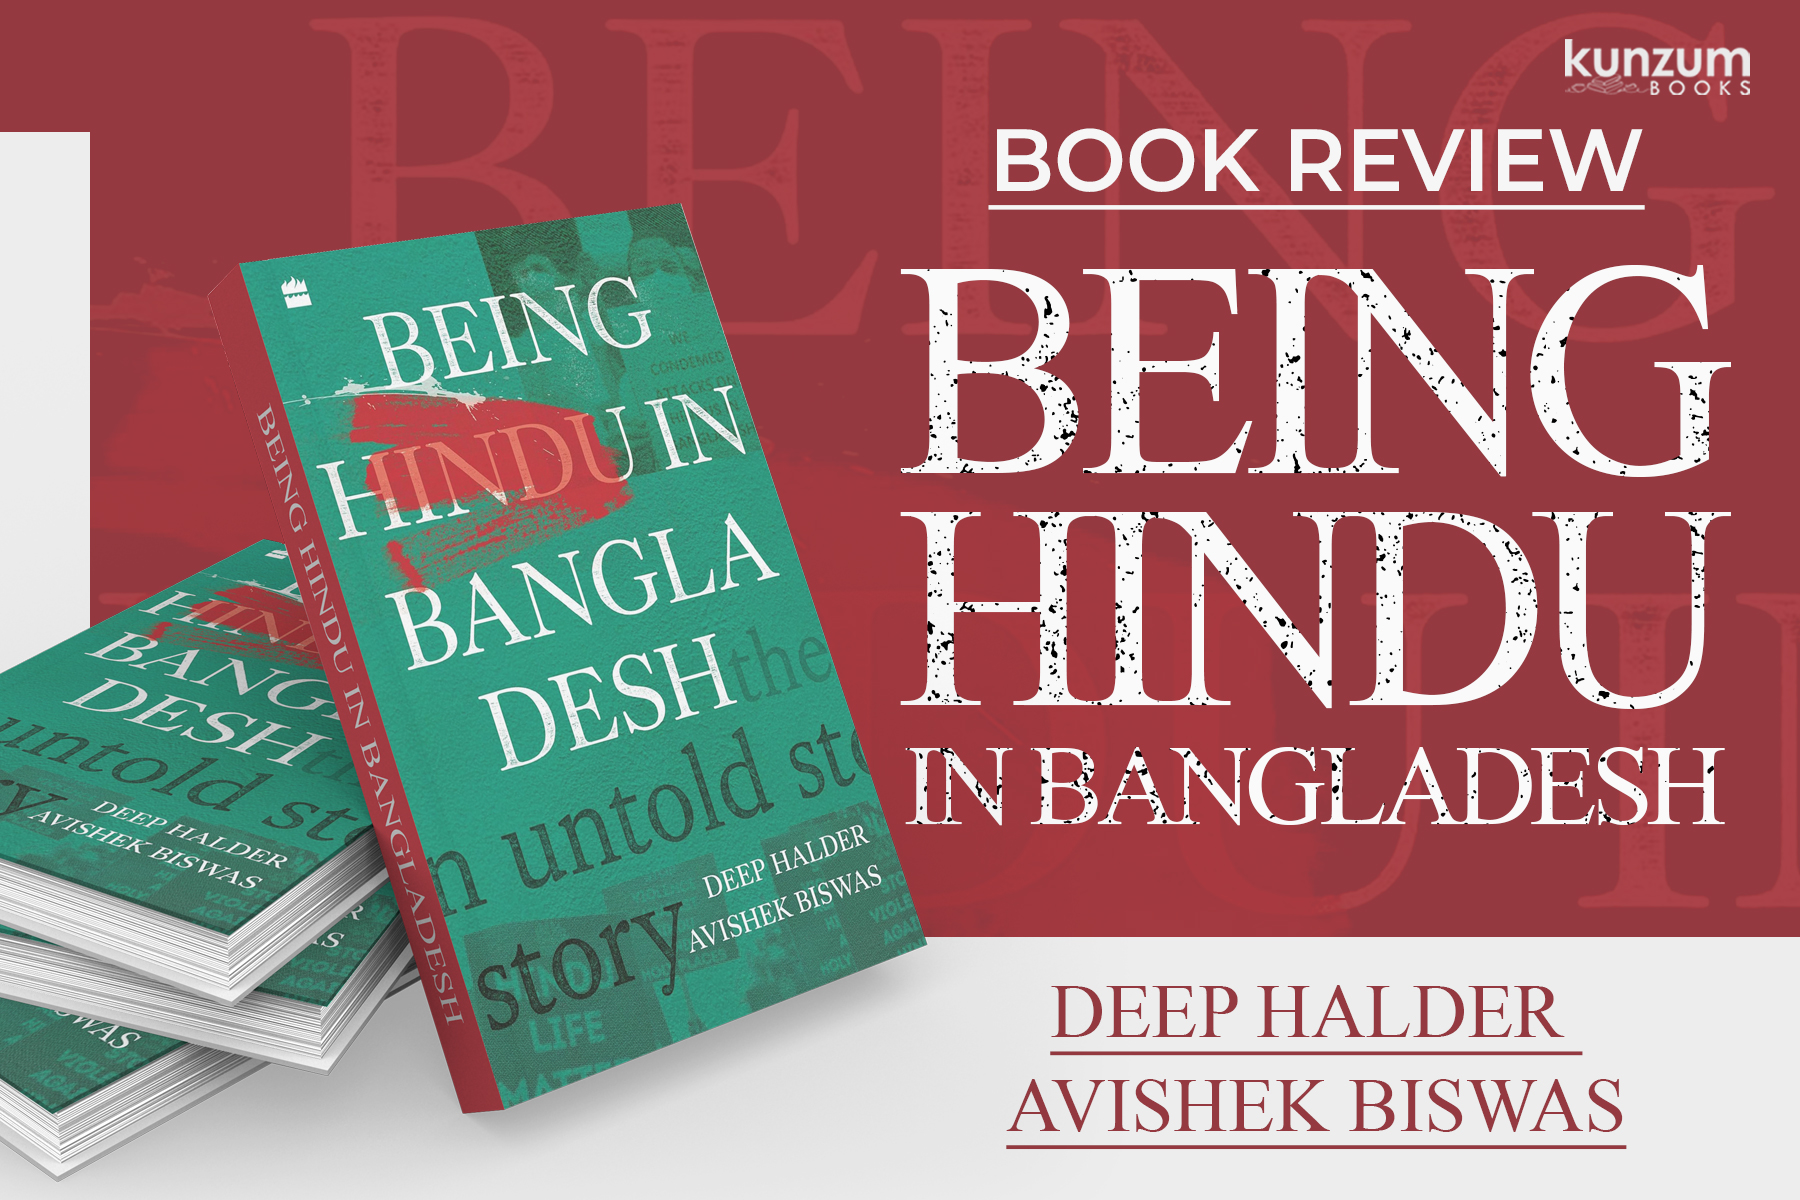 Book Review: Being Hindu in Bangladesh – The Untold Story